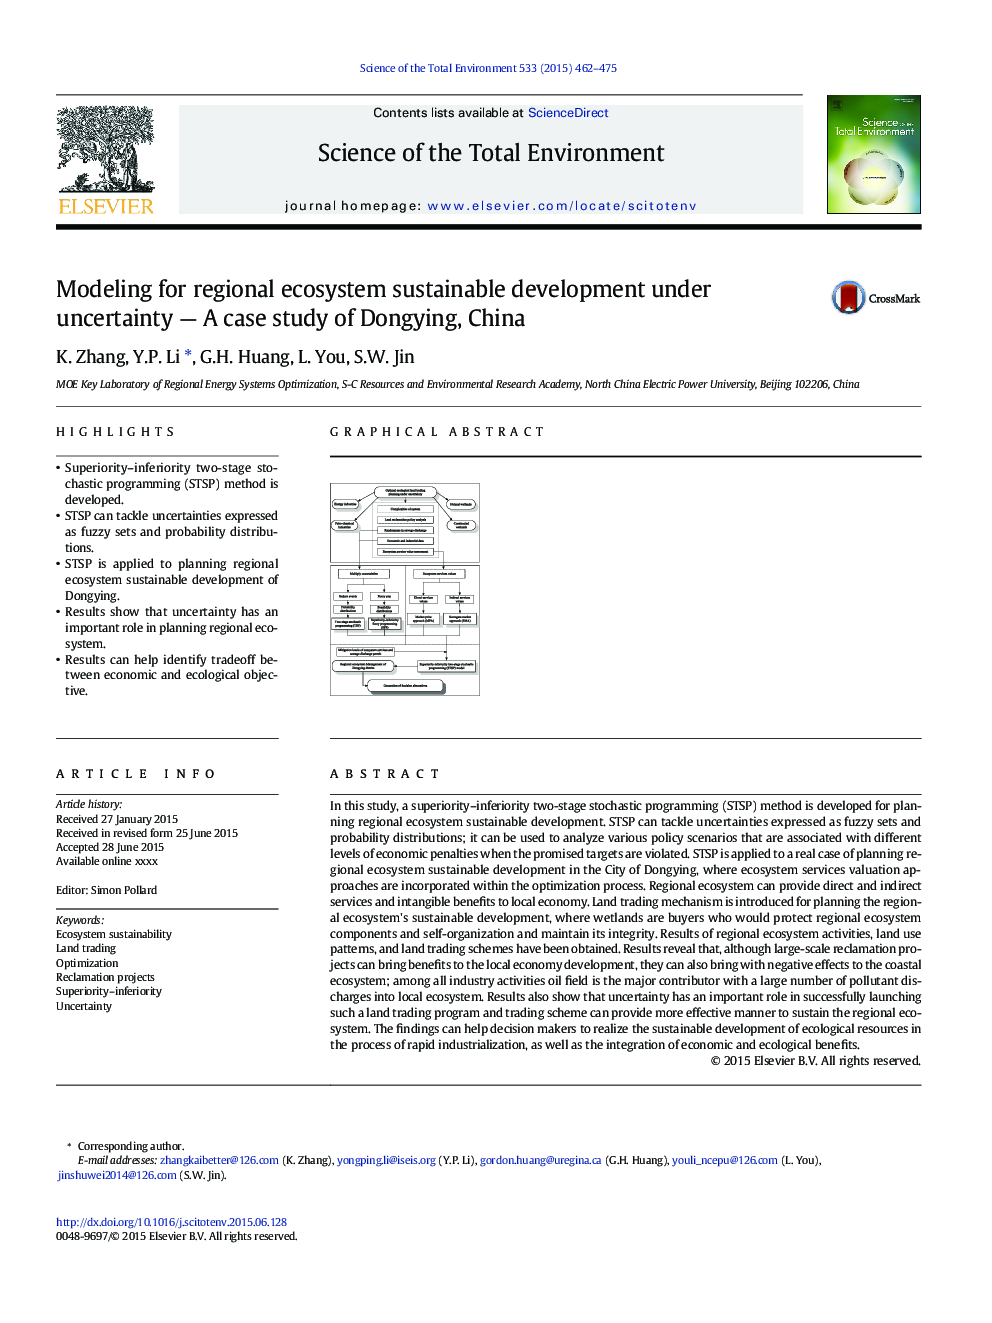 Modeling for regional ecosystem sustainable development under uncertainty - A case study of Dongying, China